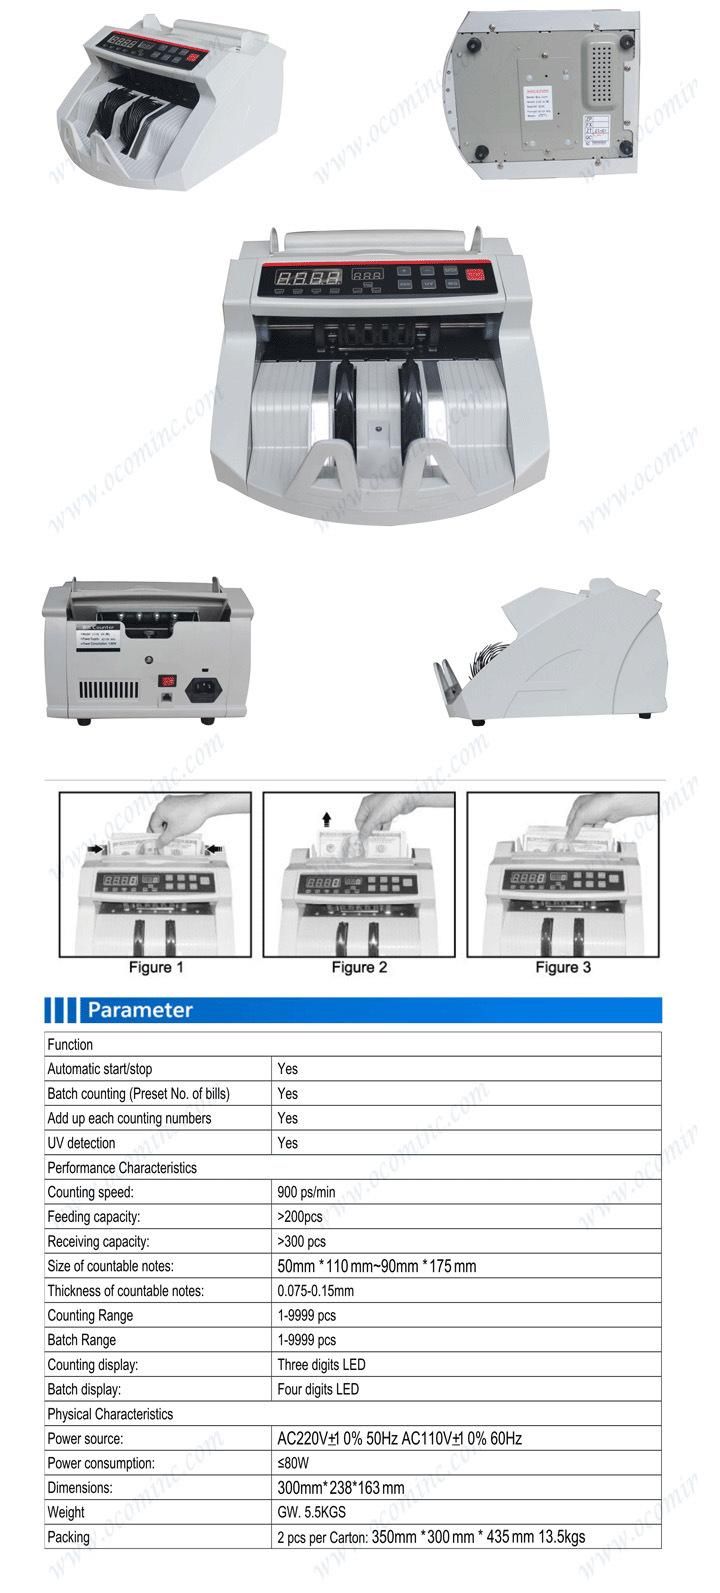 Banknote Bill Currency Counter with Money Detector for POS